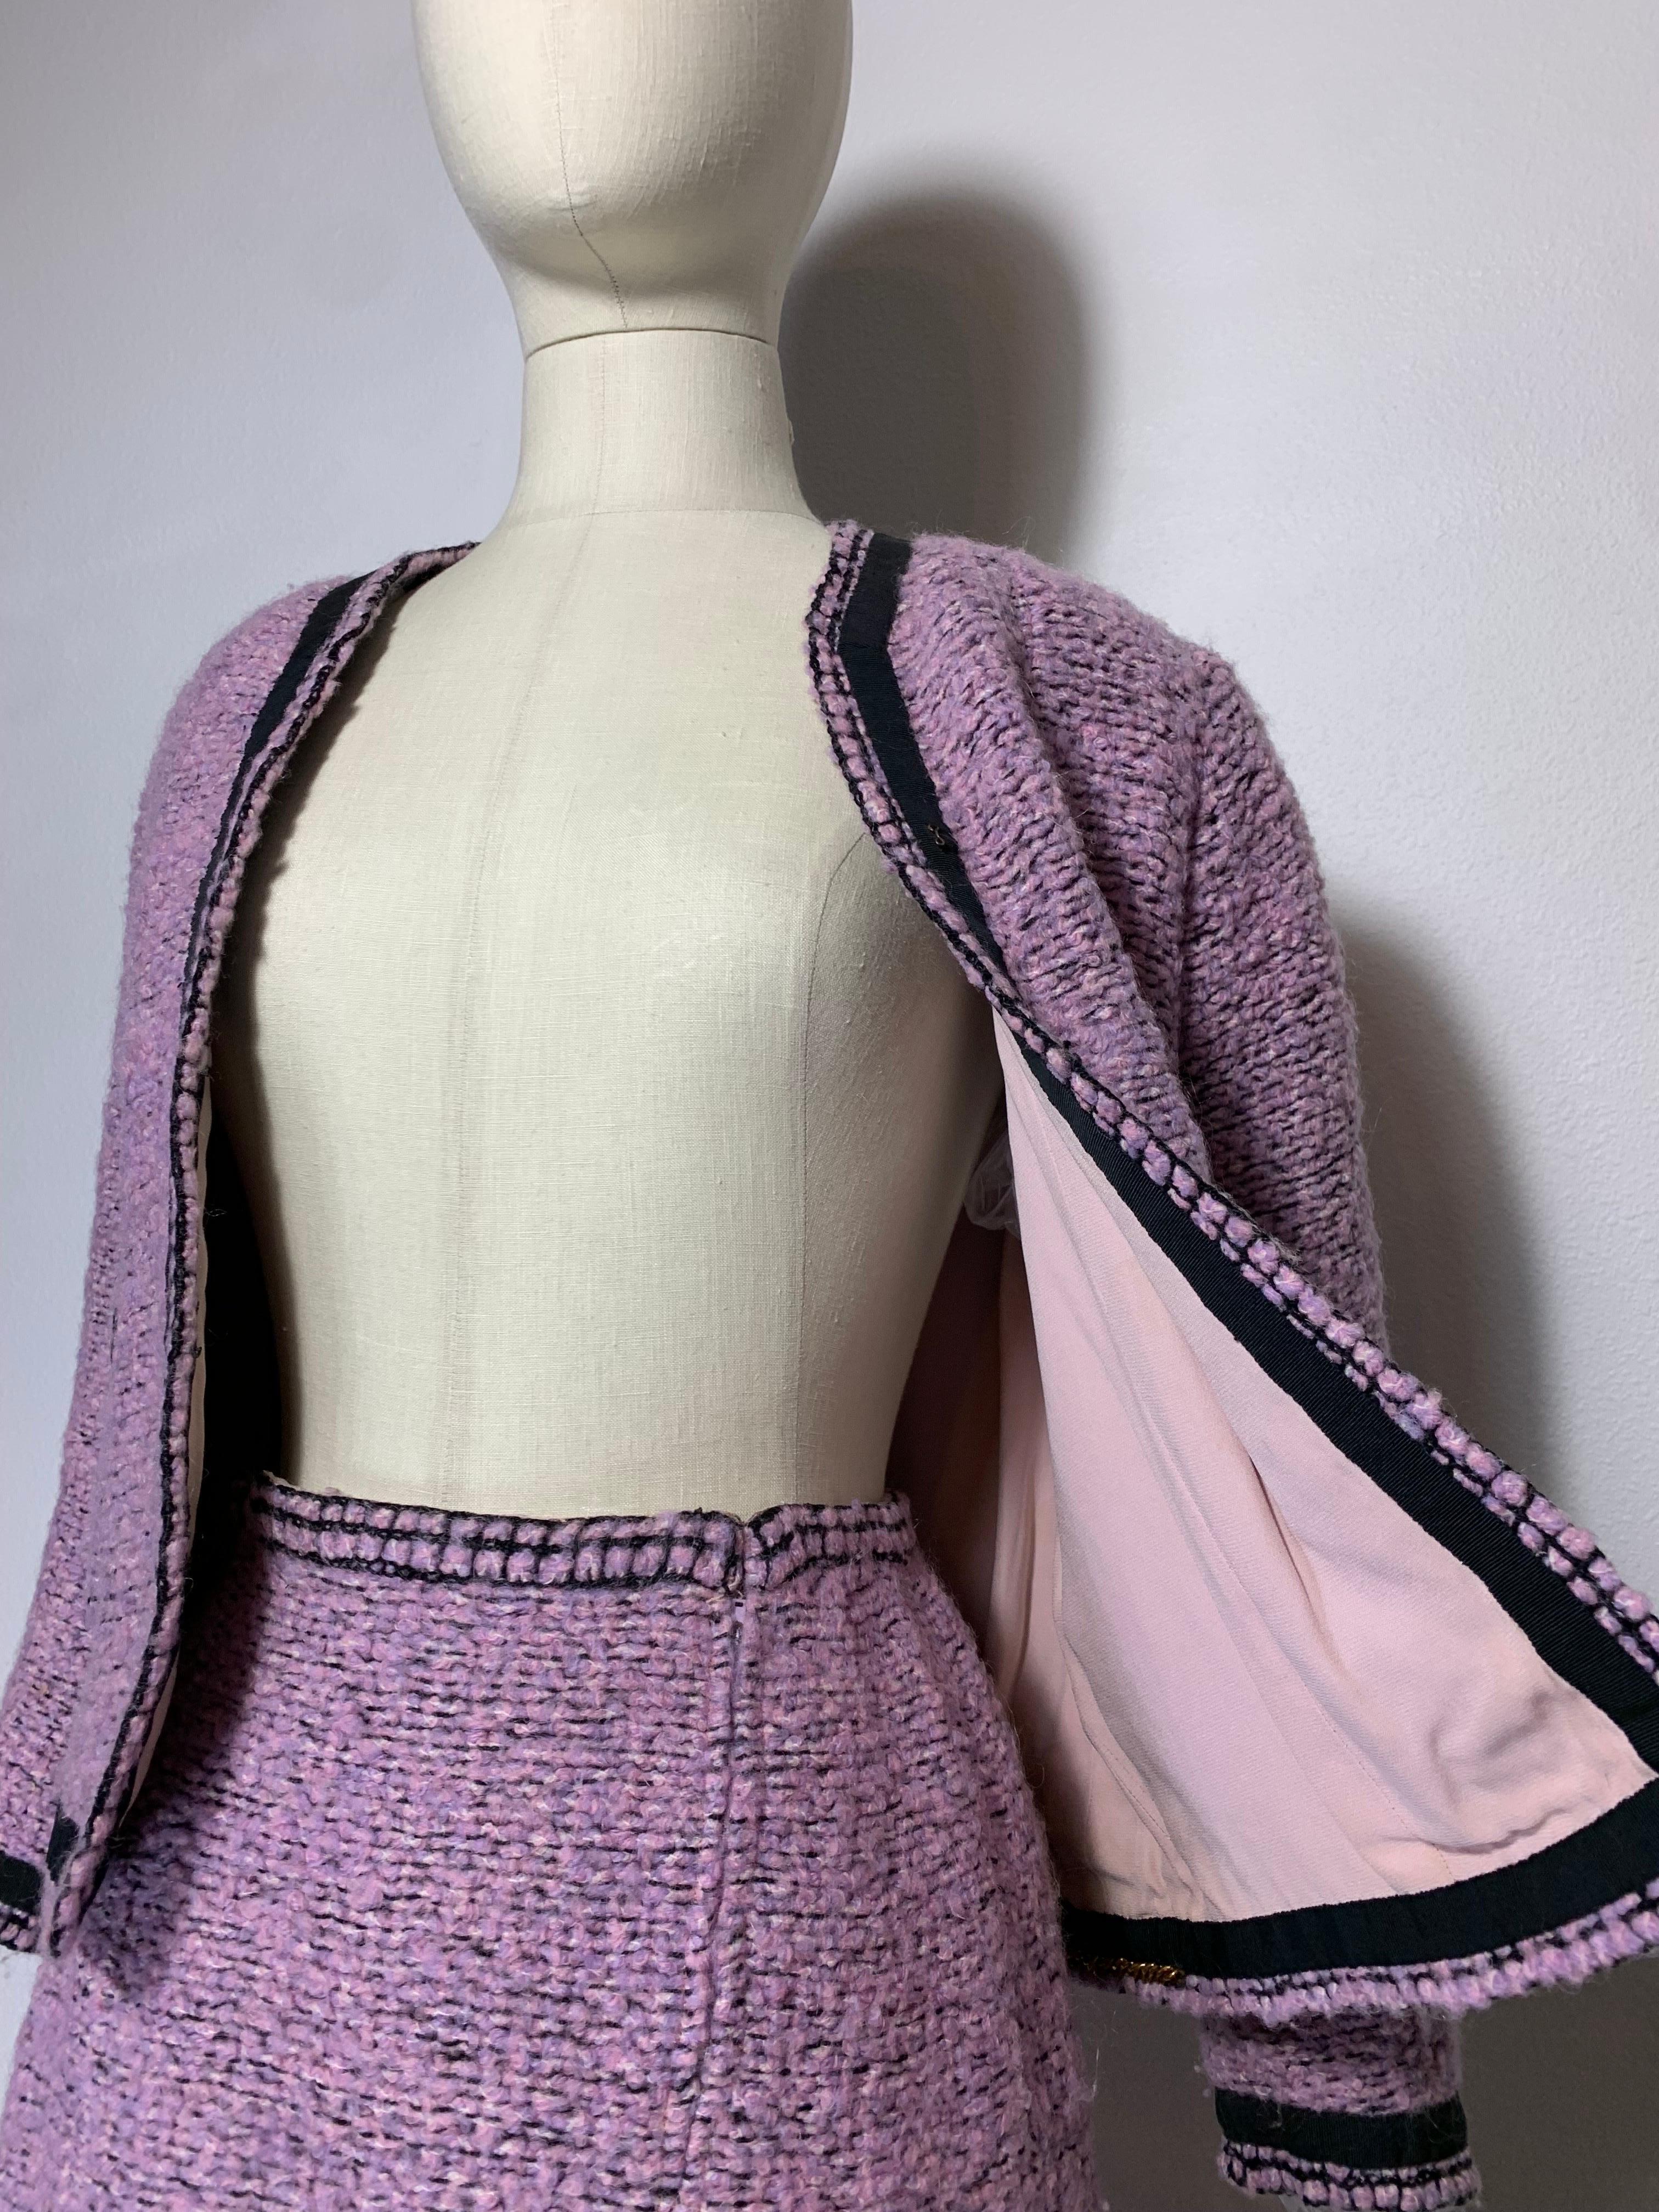 1960 Autumn/Winter Chanel Haute Couture Documented Lavender Tweed Skirt Suit  For Sale 9